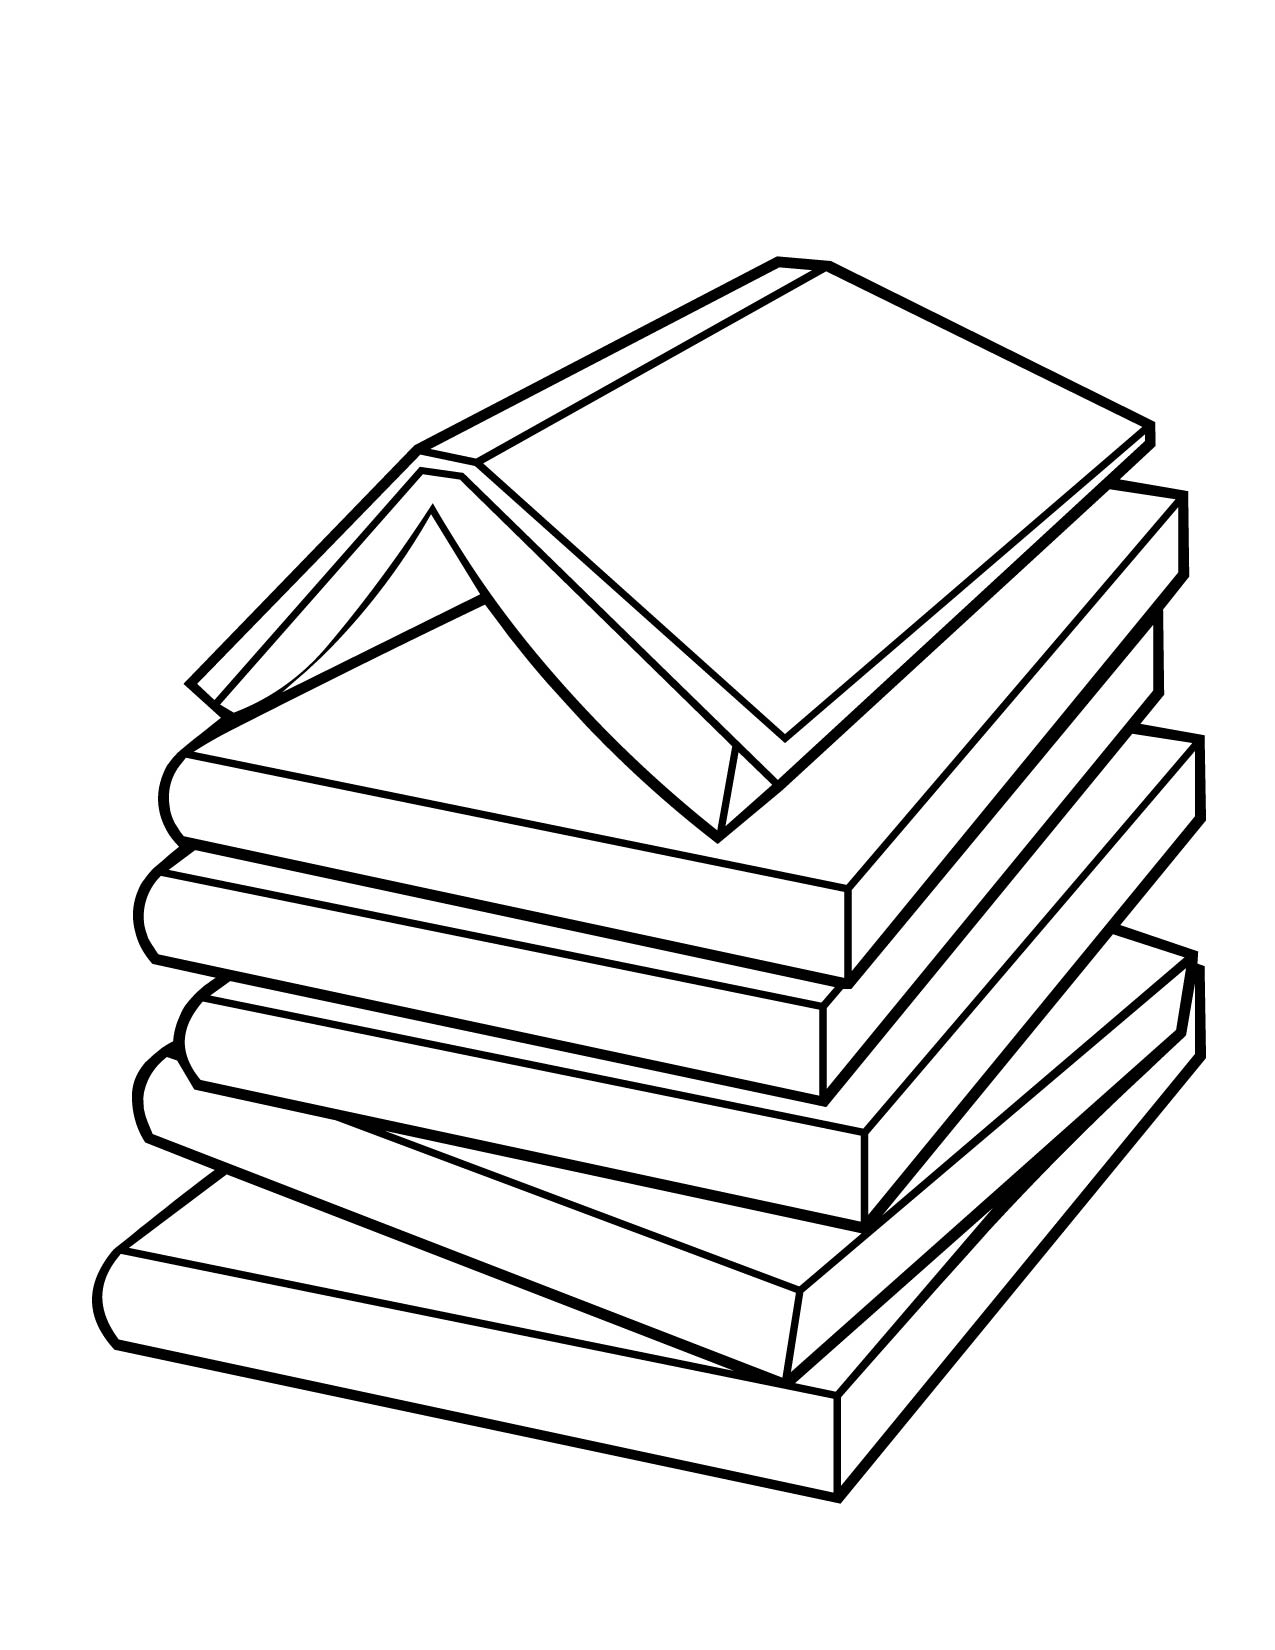 Kids Free Coloring Books Coloring Pages